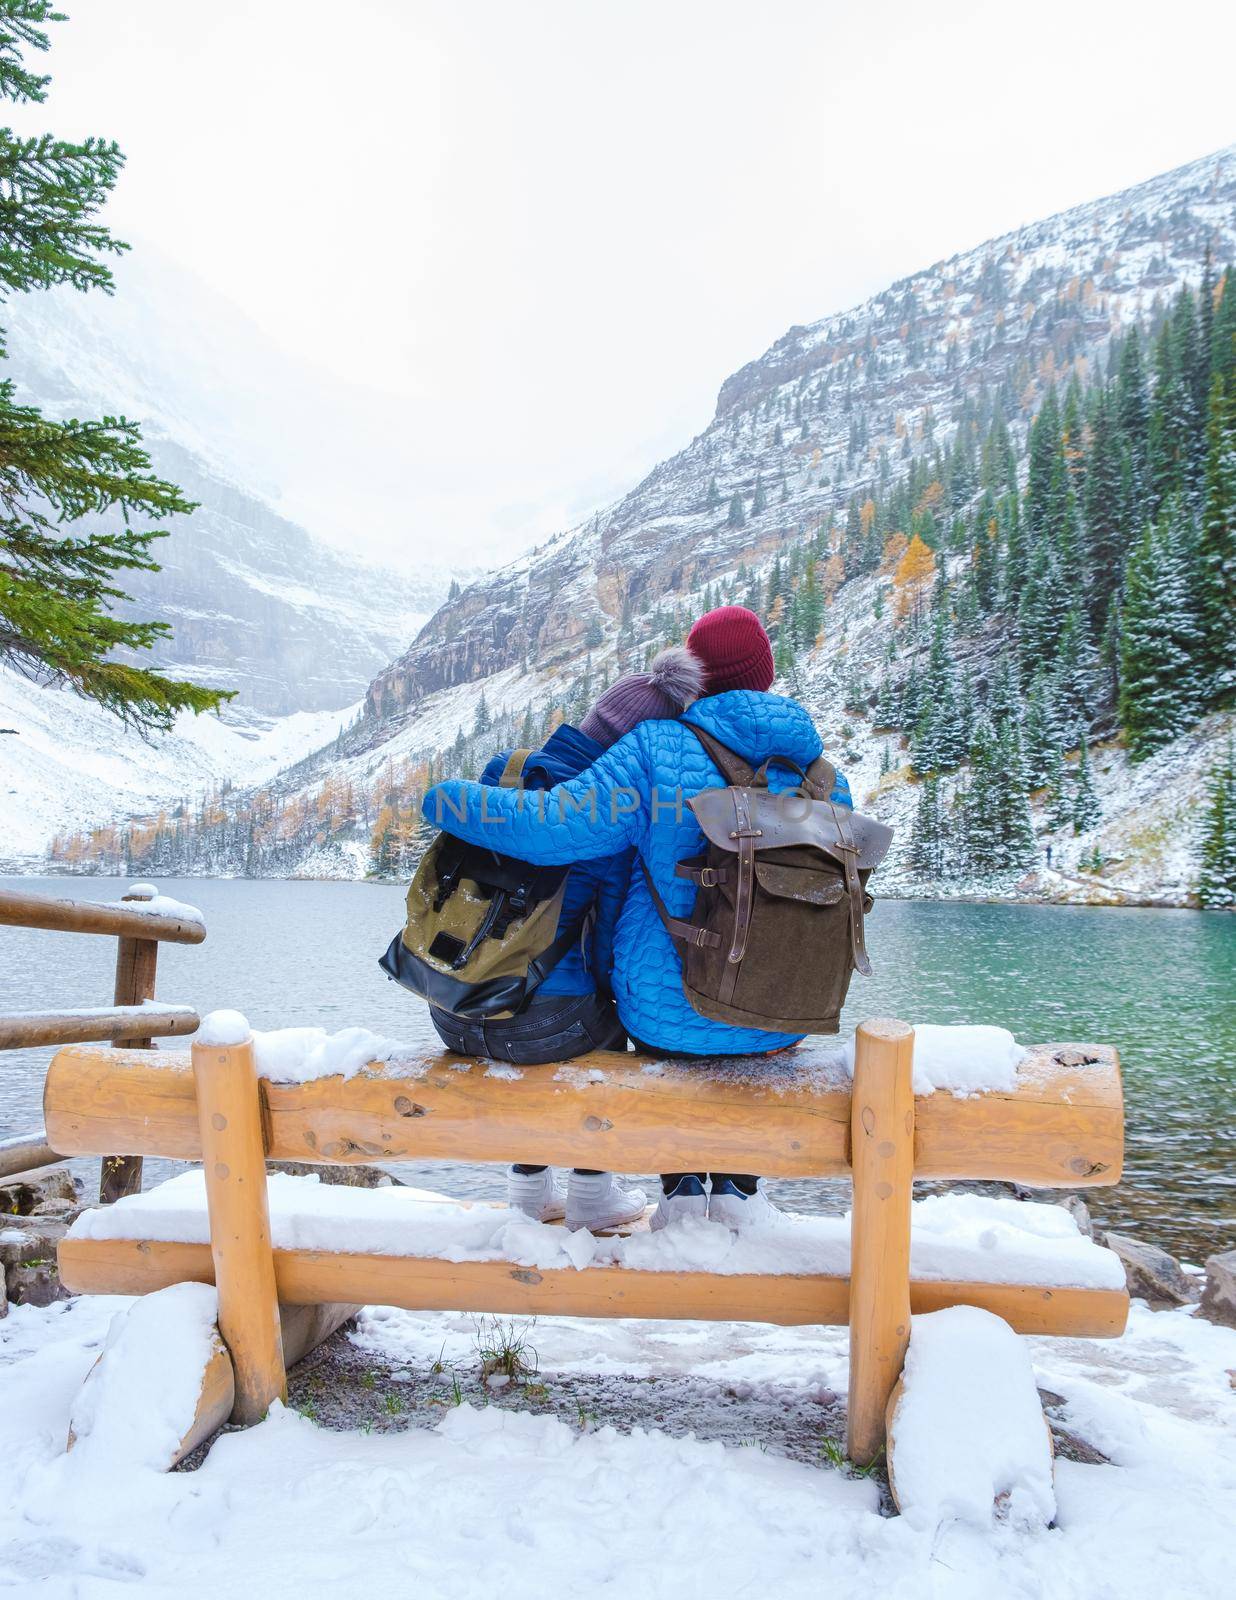 Lake Agnes by Lake Louise Banff national park is a lake in the Canadian Rocky Mountains. A young couple of men and women sitting on a bench by the lake during a cold day in Autumn in Canada with snow